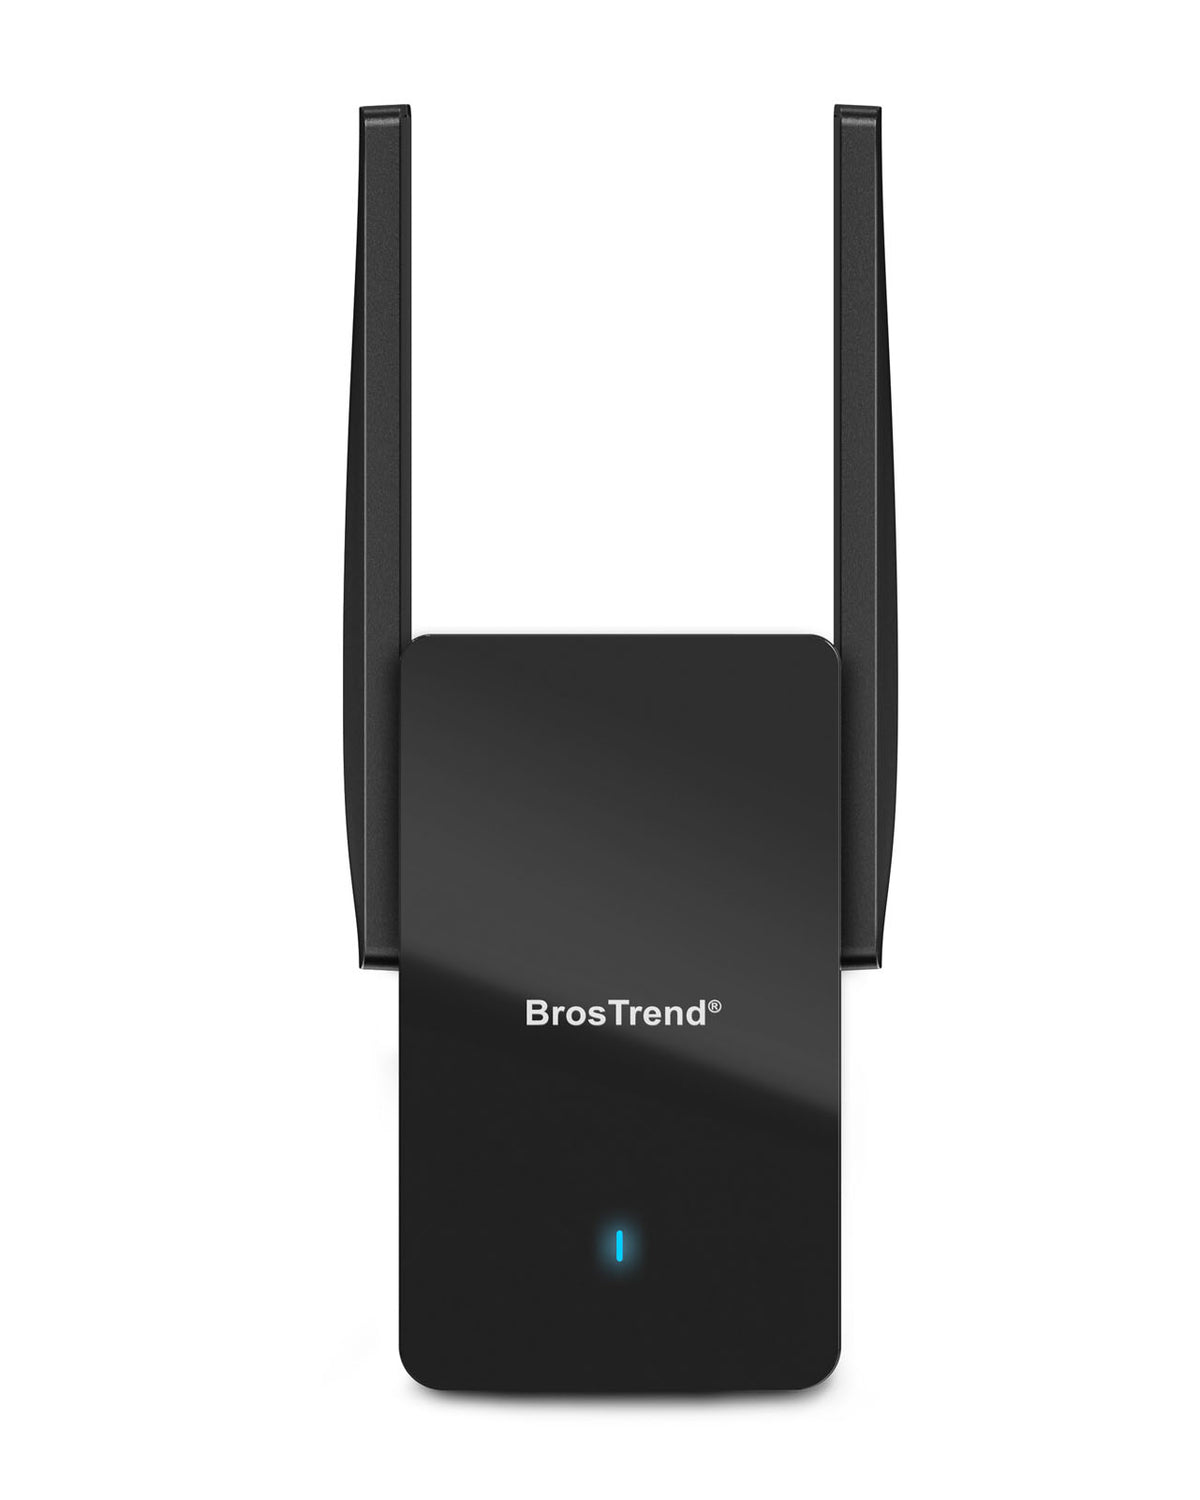 BrosTrend-AX3000-WiFi-6-Access-Point-Delivers-Dual-Band-3000-Mbps-Speeds-Comes-with-One-Gigabit-Ethernet-Port-Wall-Plug-Design-Supports-Up-to-45-Wireless-Devices.jpg__PID:0337f06b-8bb0-45f7-84bc-9212c2470c28